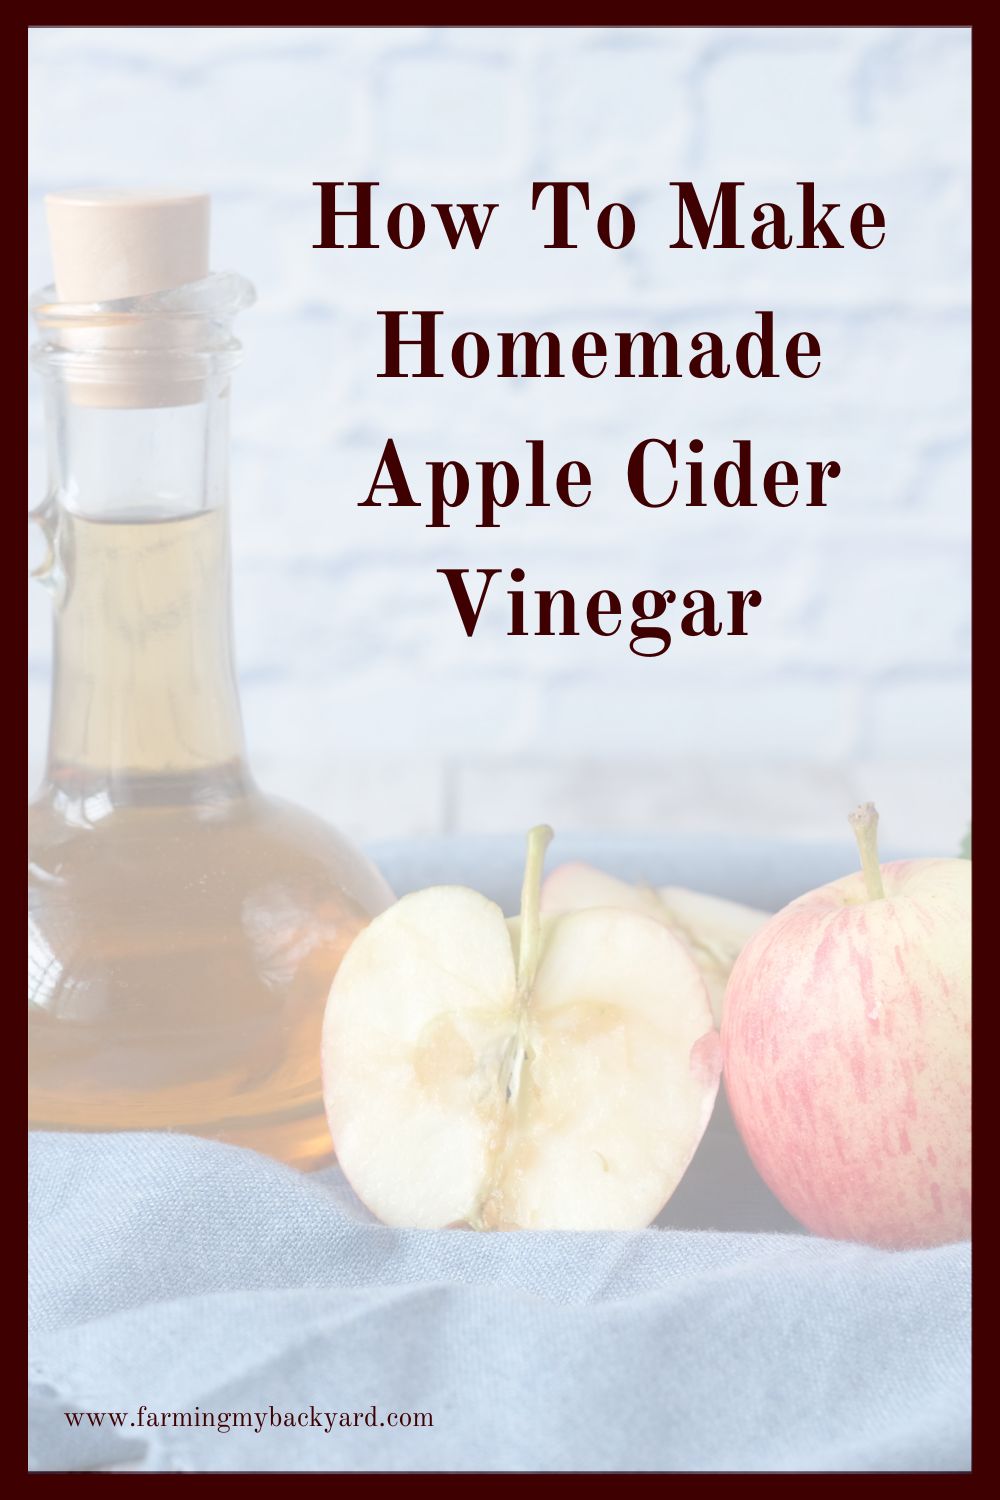 Homemade apple cider vinegar is super easy and takes about two seconds to start. You can produce yet another food at home in your kitchen AND use something that is otherwise considered waste.